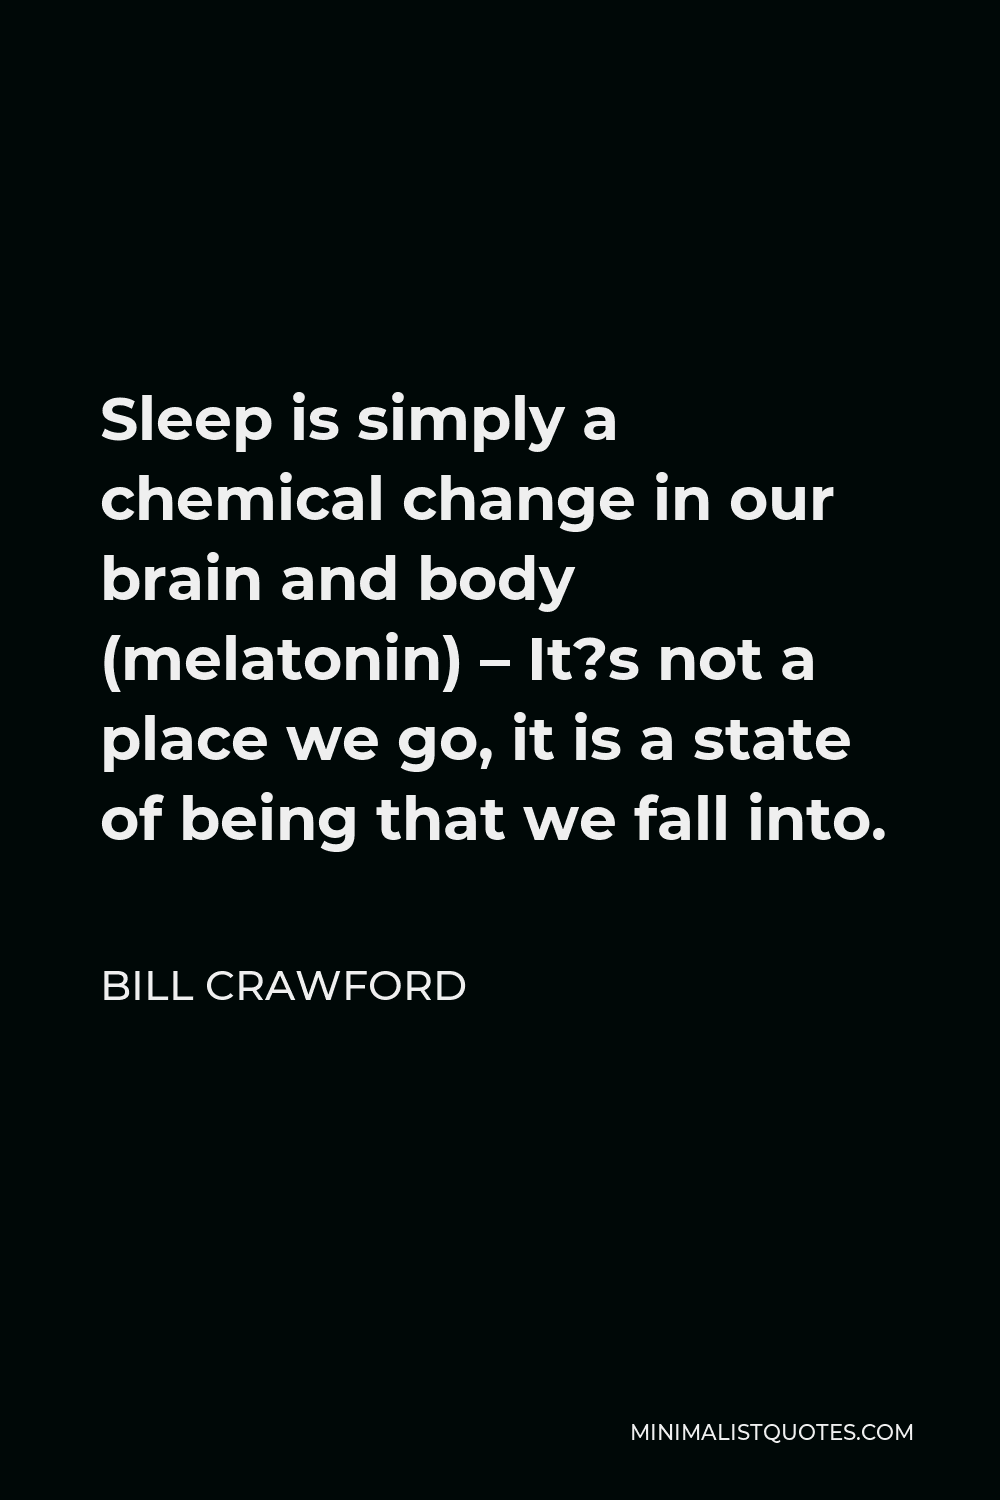 Bill Crawford Quote - Sleep is simply a chemical change in our brain and body (melatonin) – It?s not a place we go, it is a state of being that we fall into.